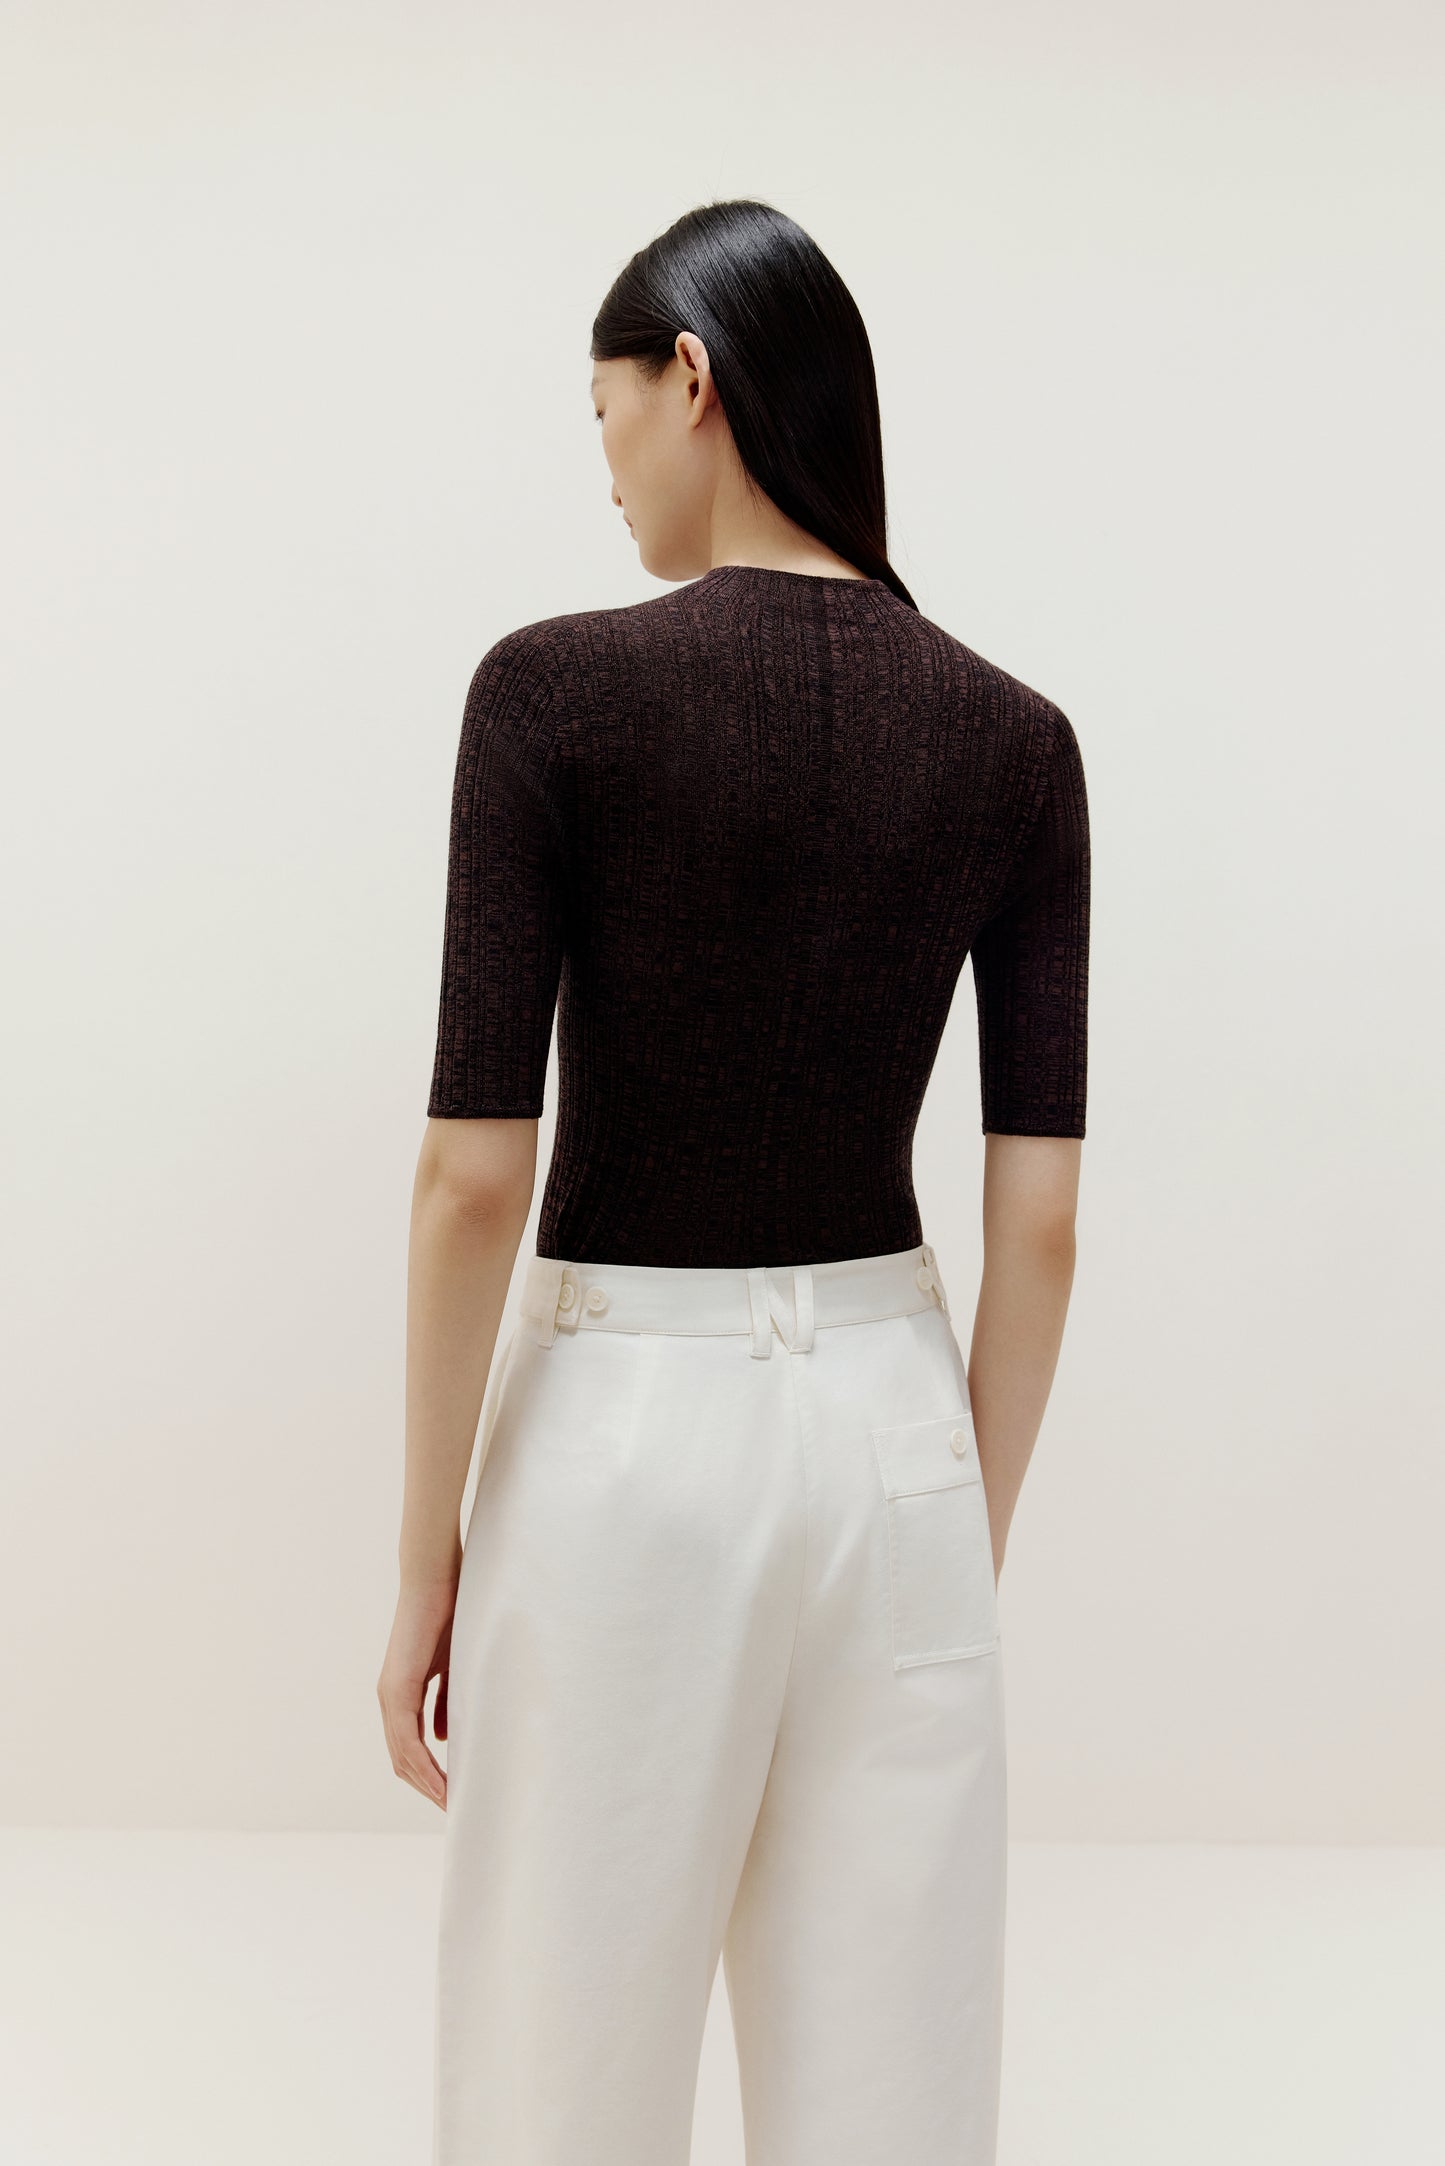 back of a woman wearing a brown sweater and white pants